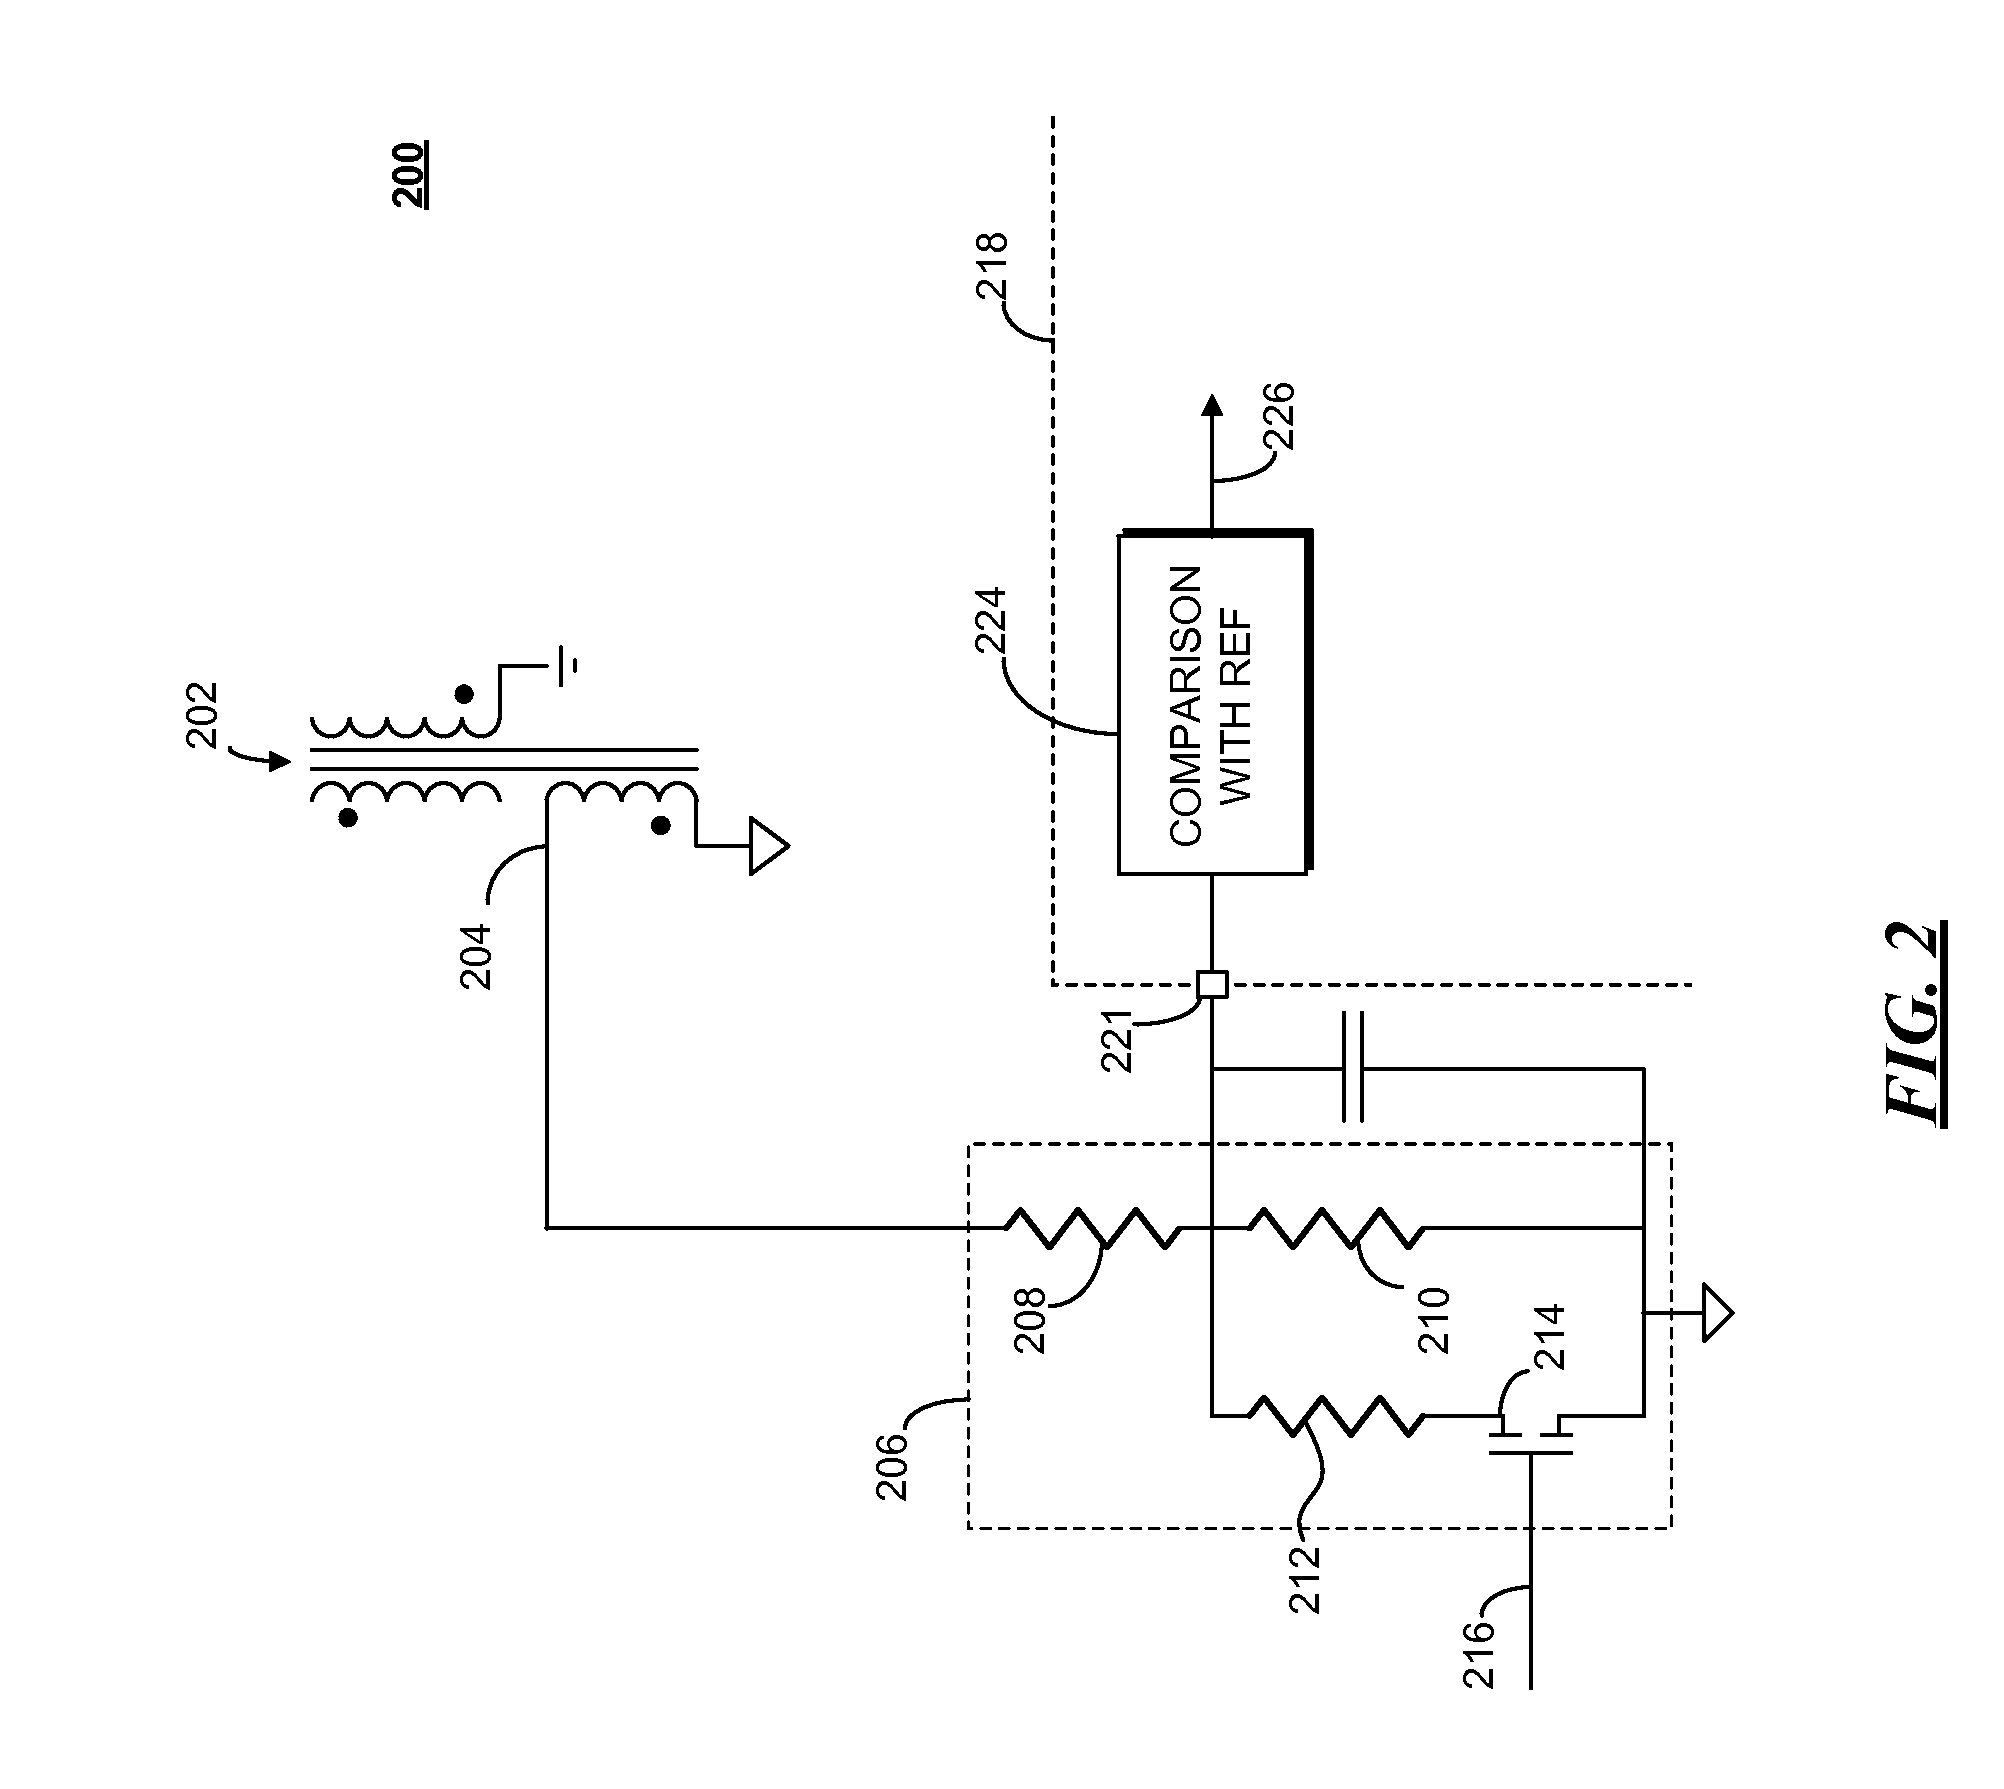 Method and apparatus for charging batteries having different voltage ranges with a single conversion charger